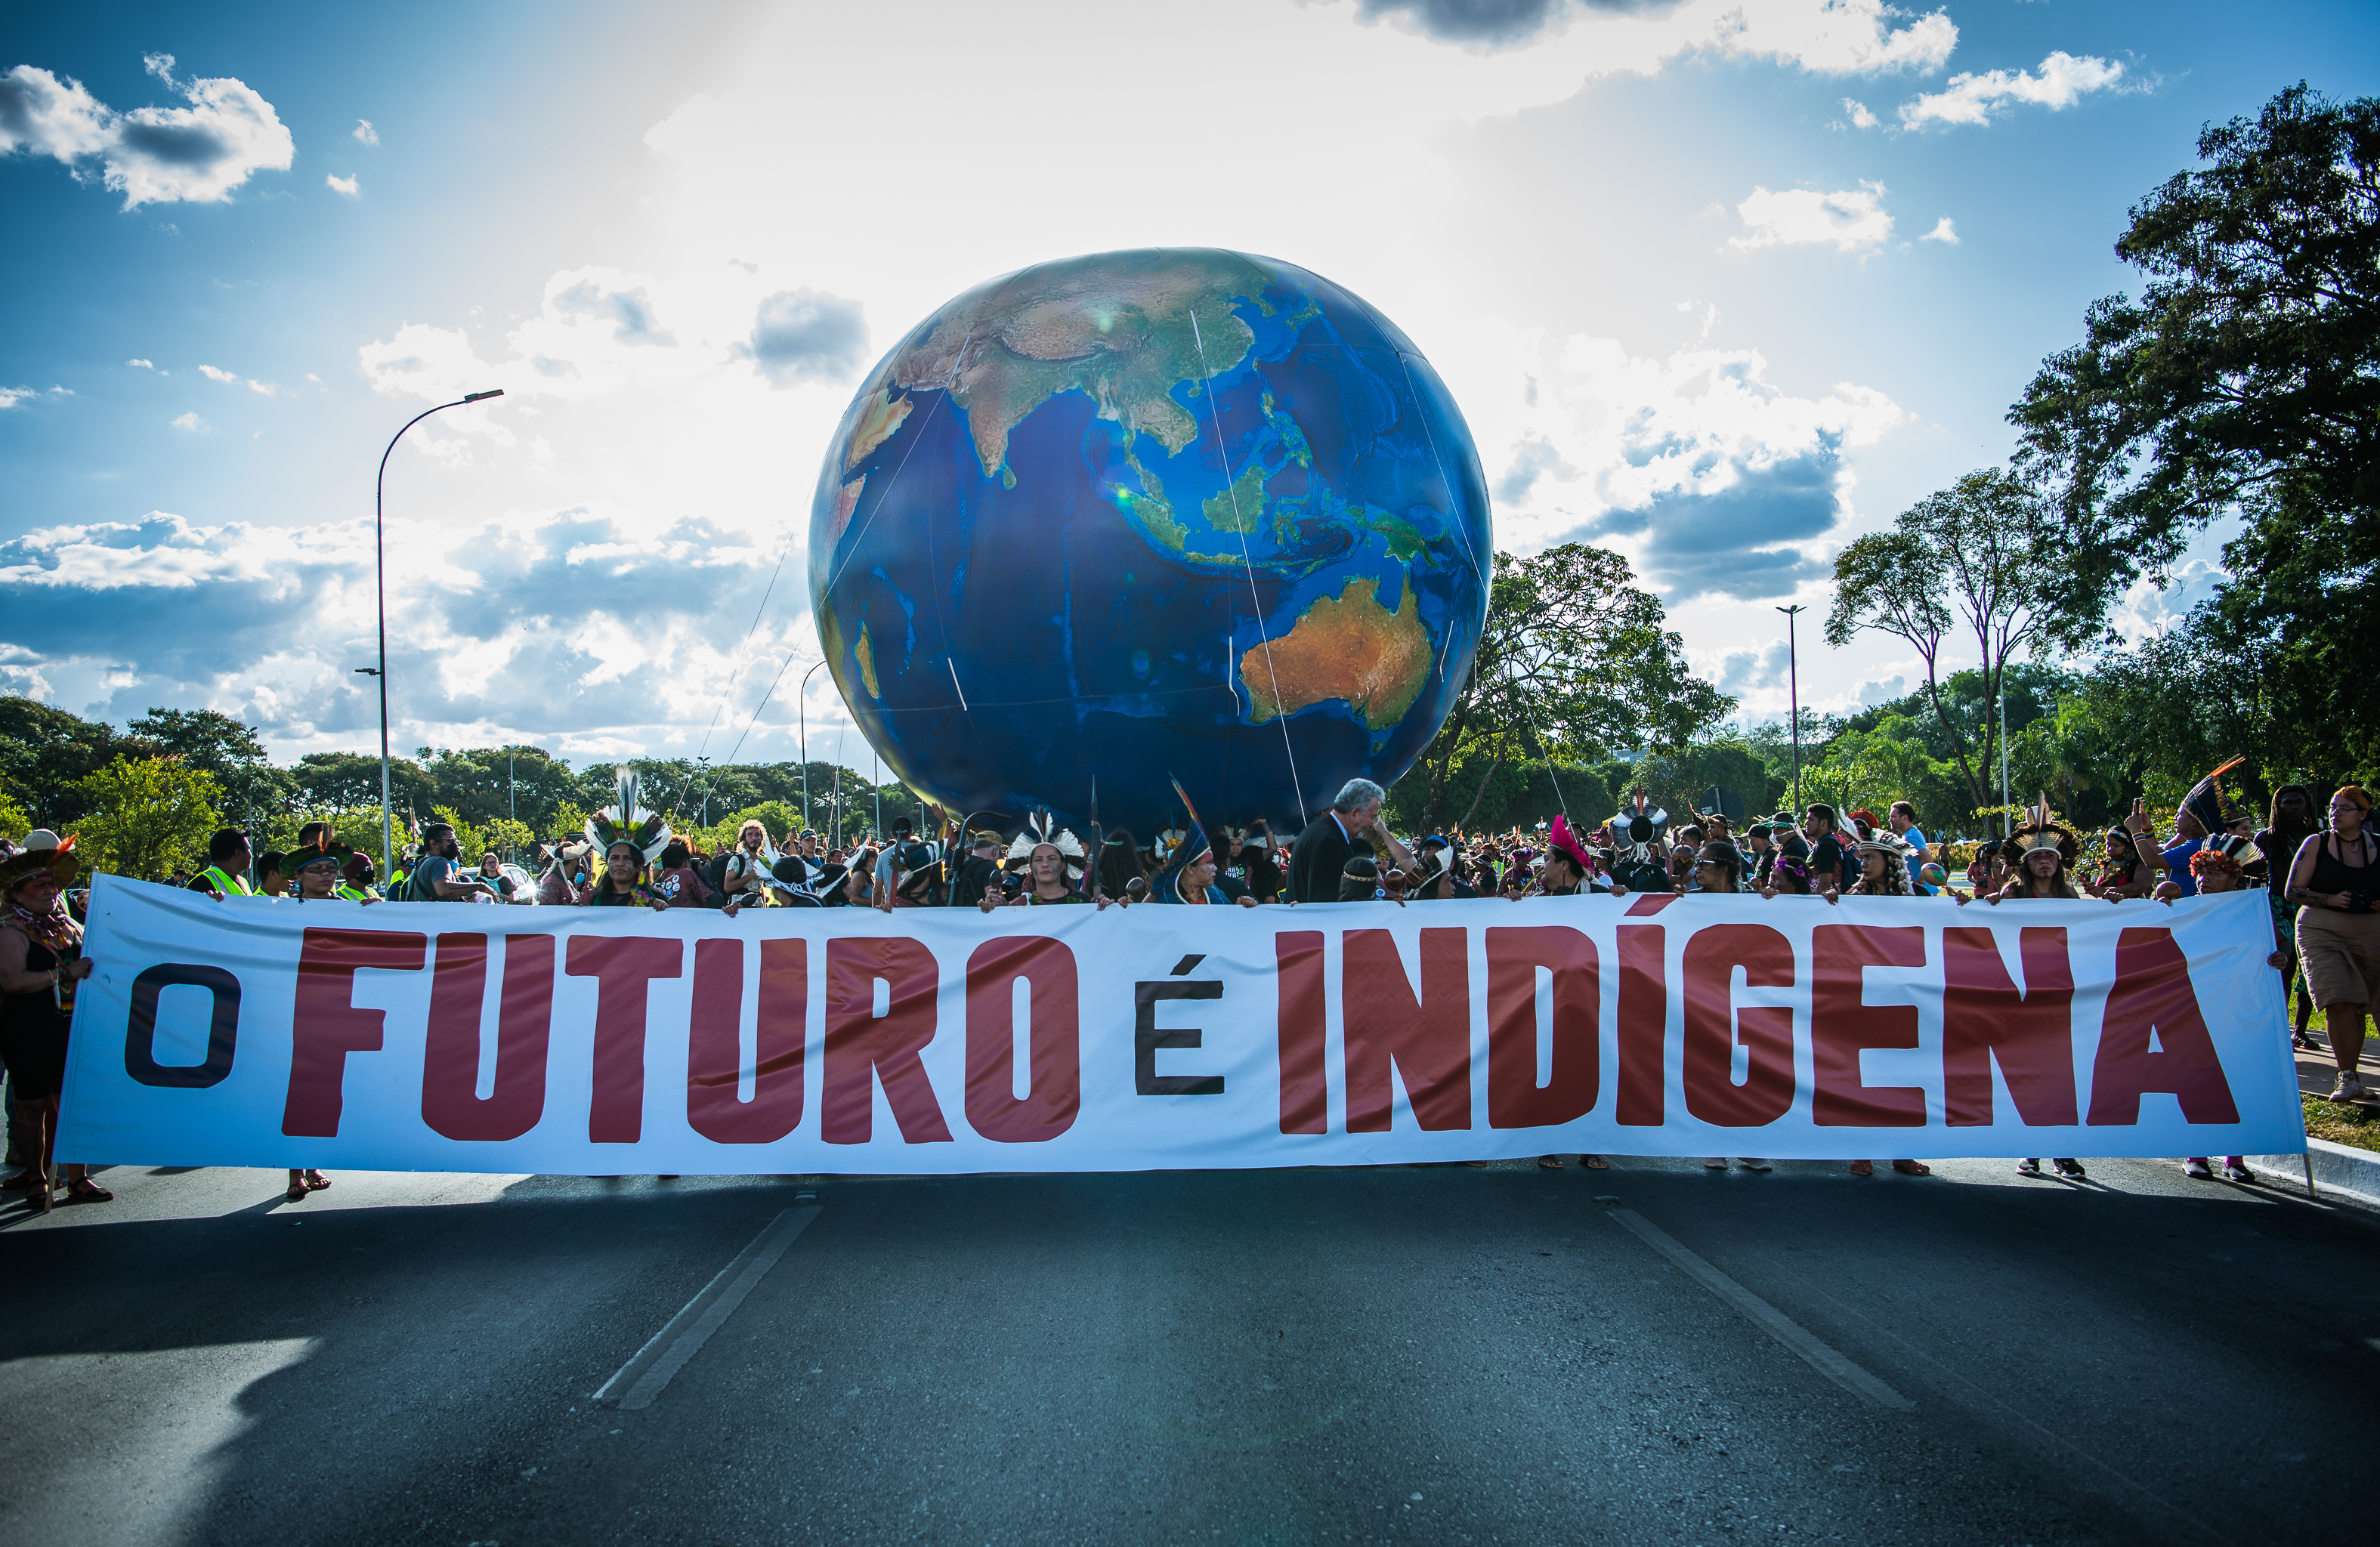 18th edition of the Acampamento Terra Livre (ATL) by the Indigenous peoples of Brazil